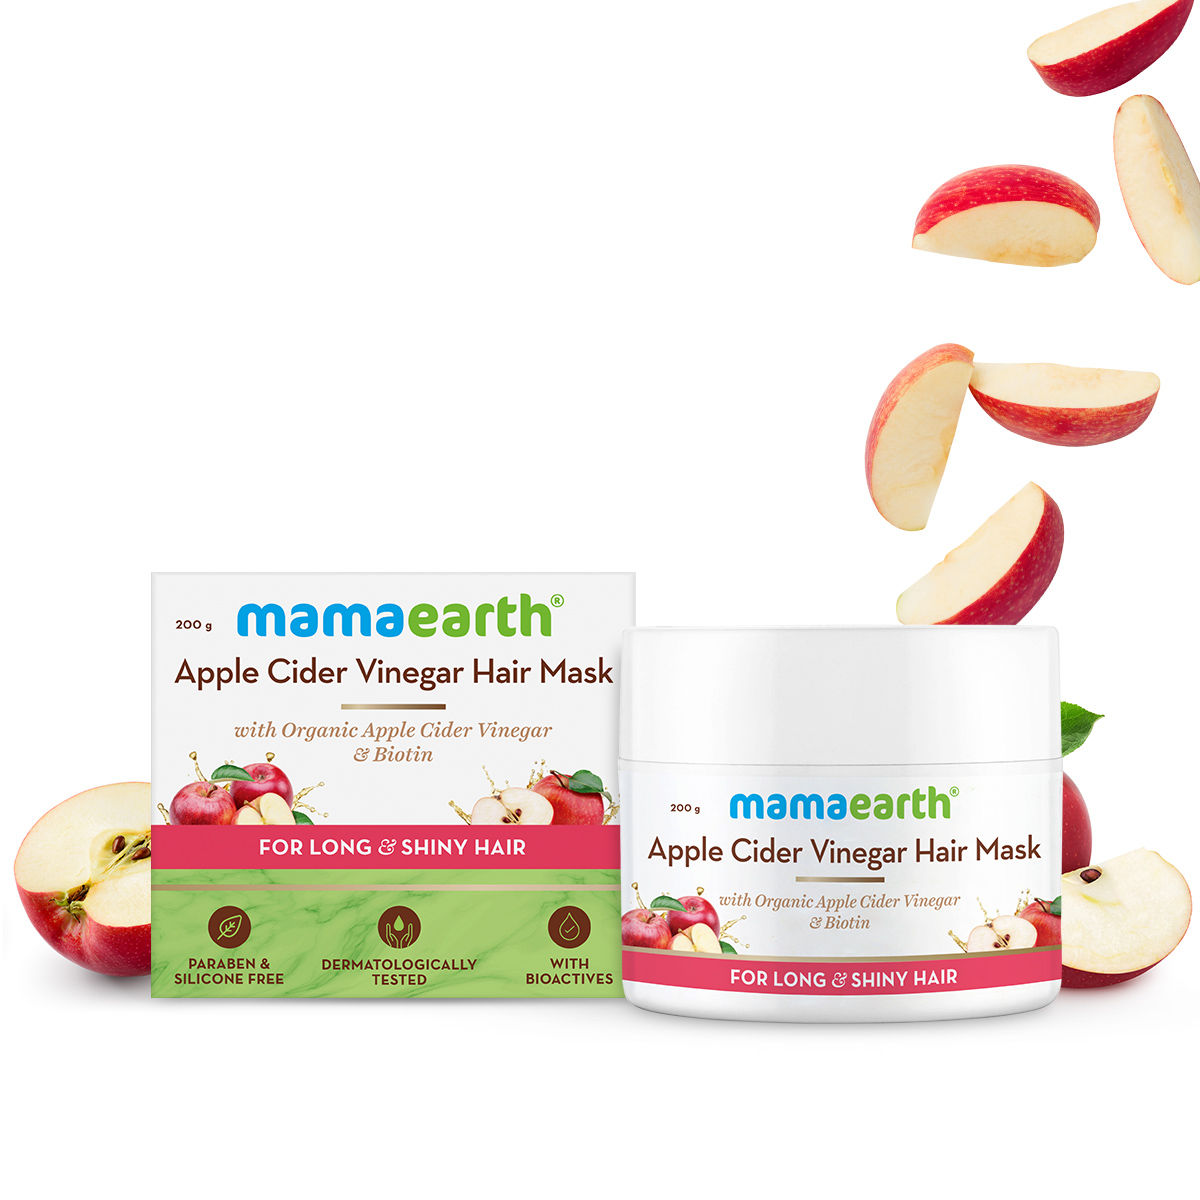 Mamaearth Apple Cider Vinegar Hair Mask With Organic Apple Cider Vinegar & Biotin For Hair Growth